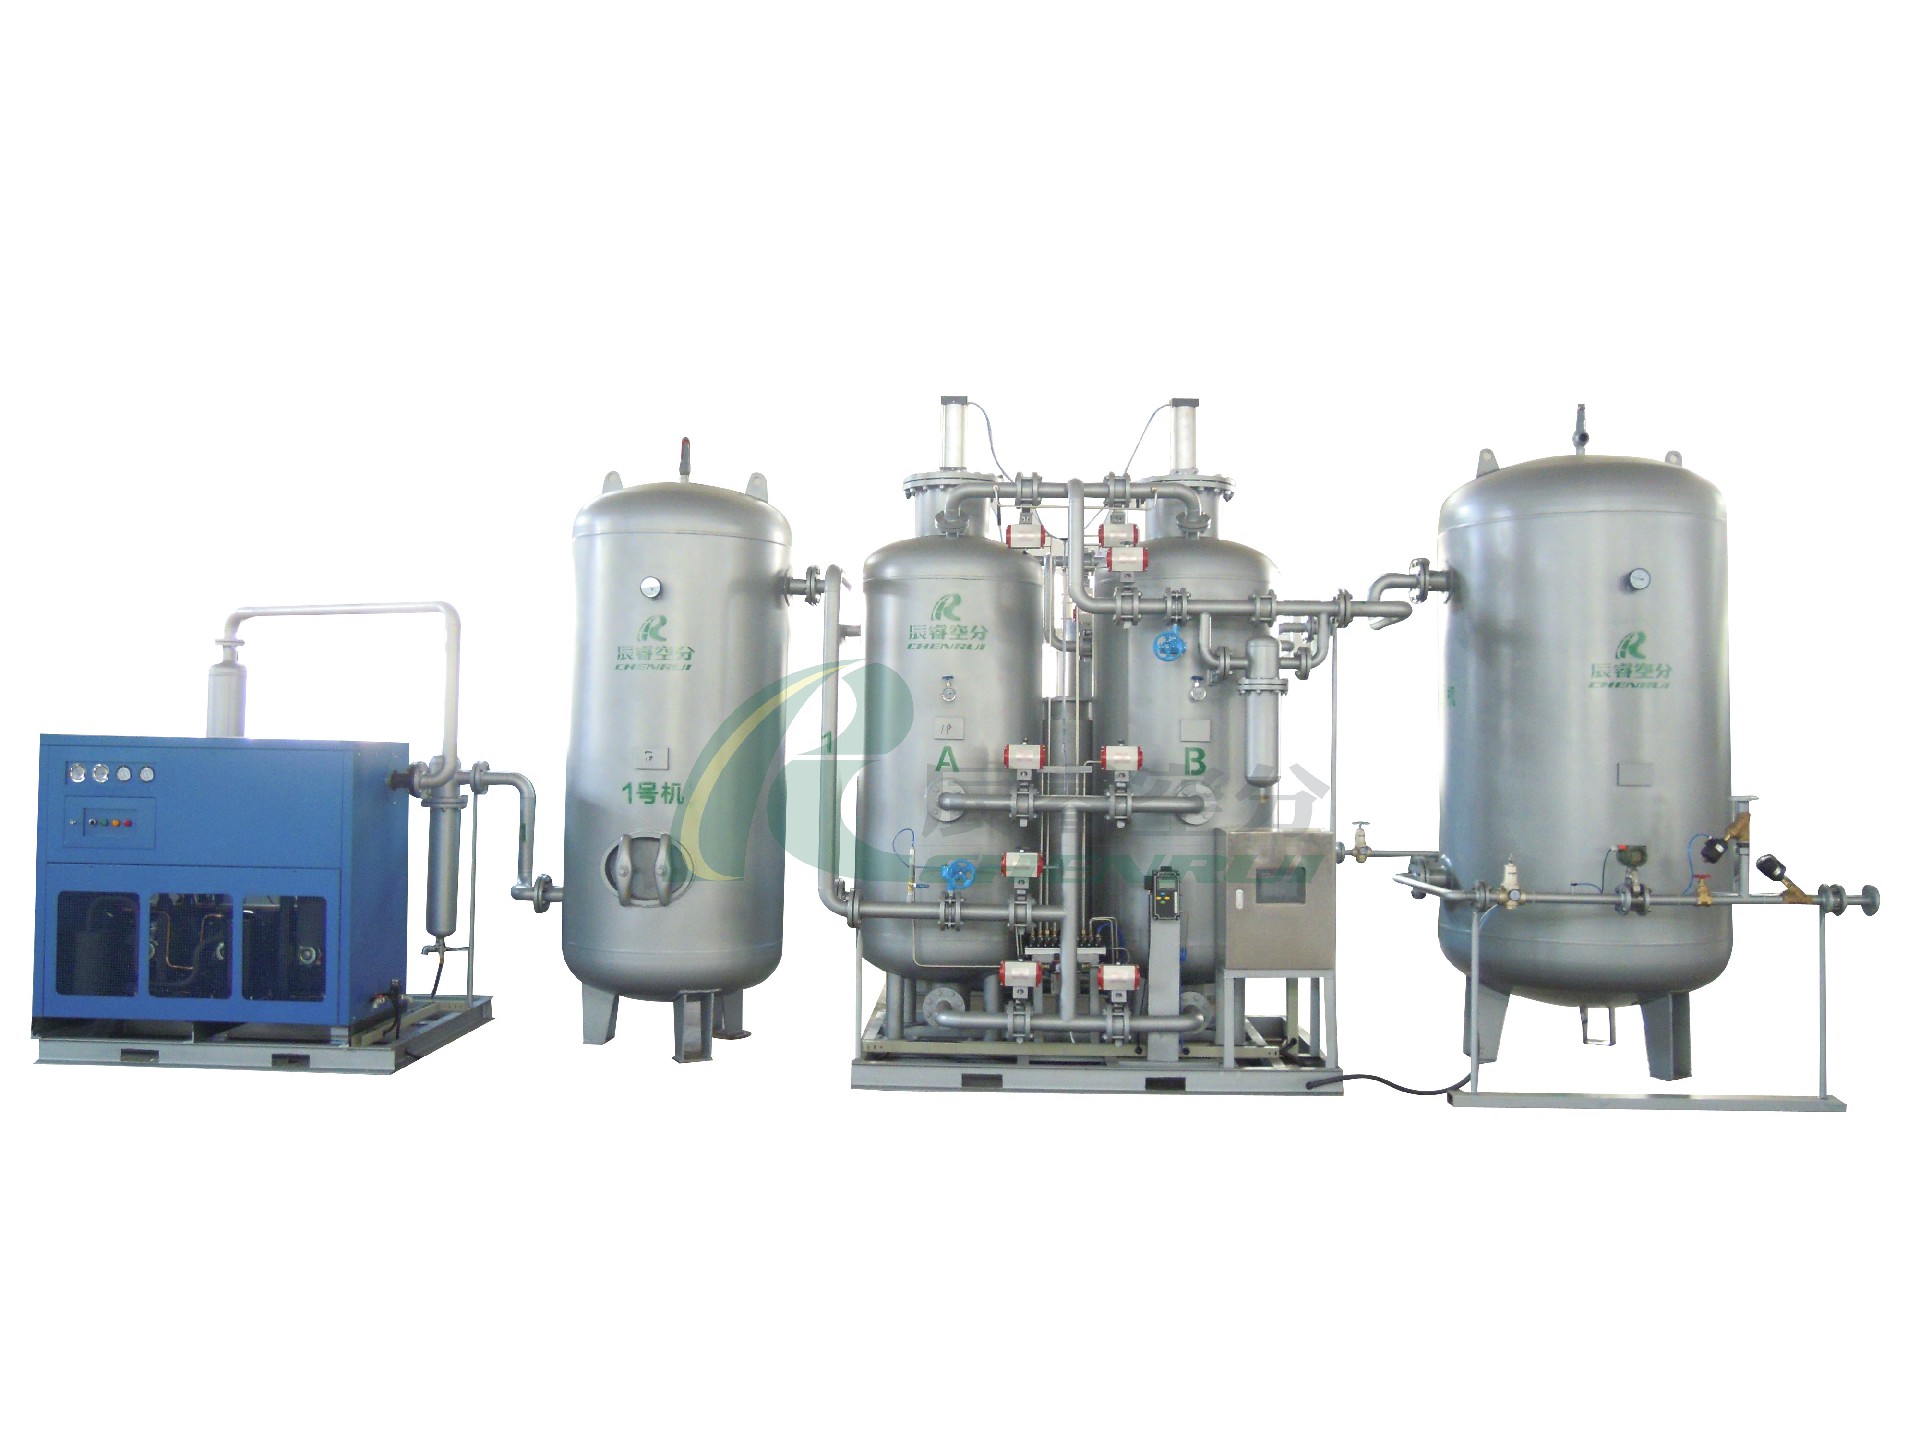 What are the common problems of nitrogen generators?